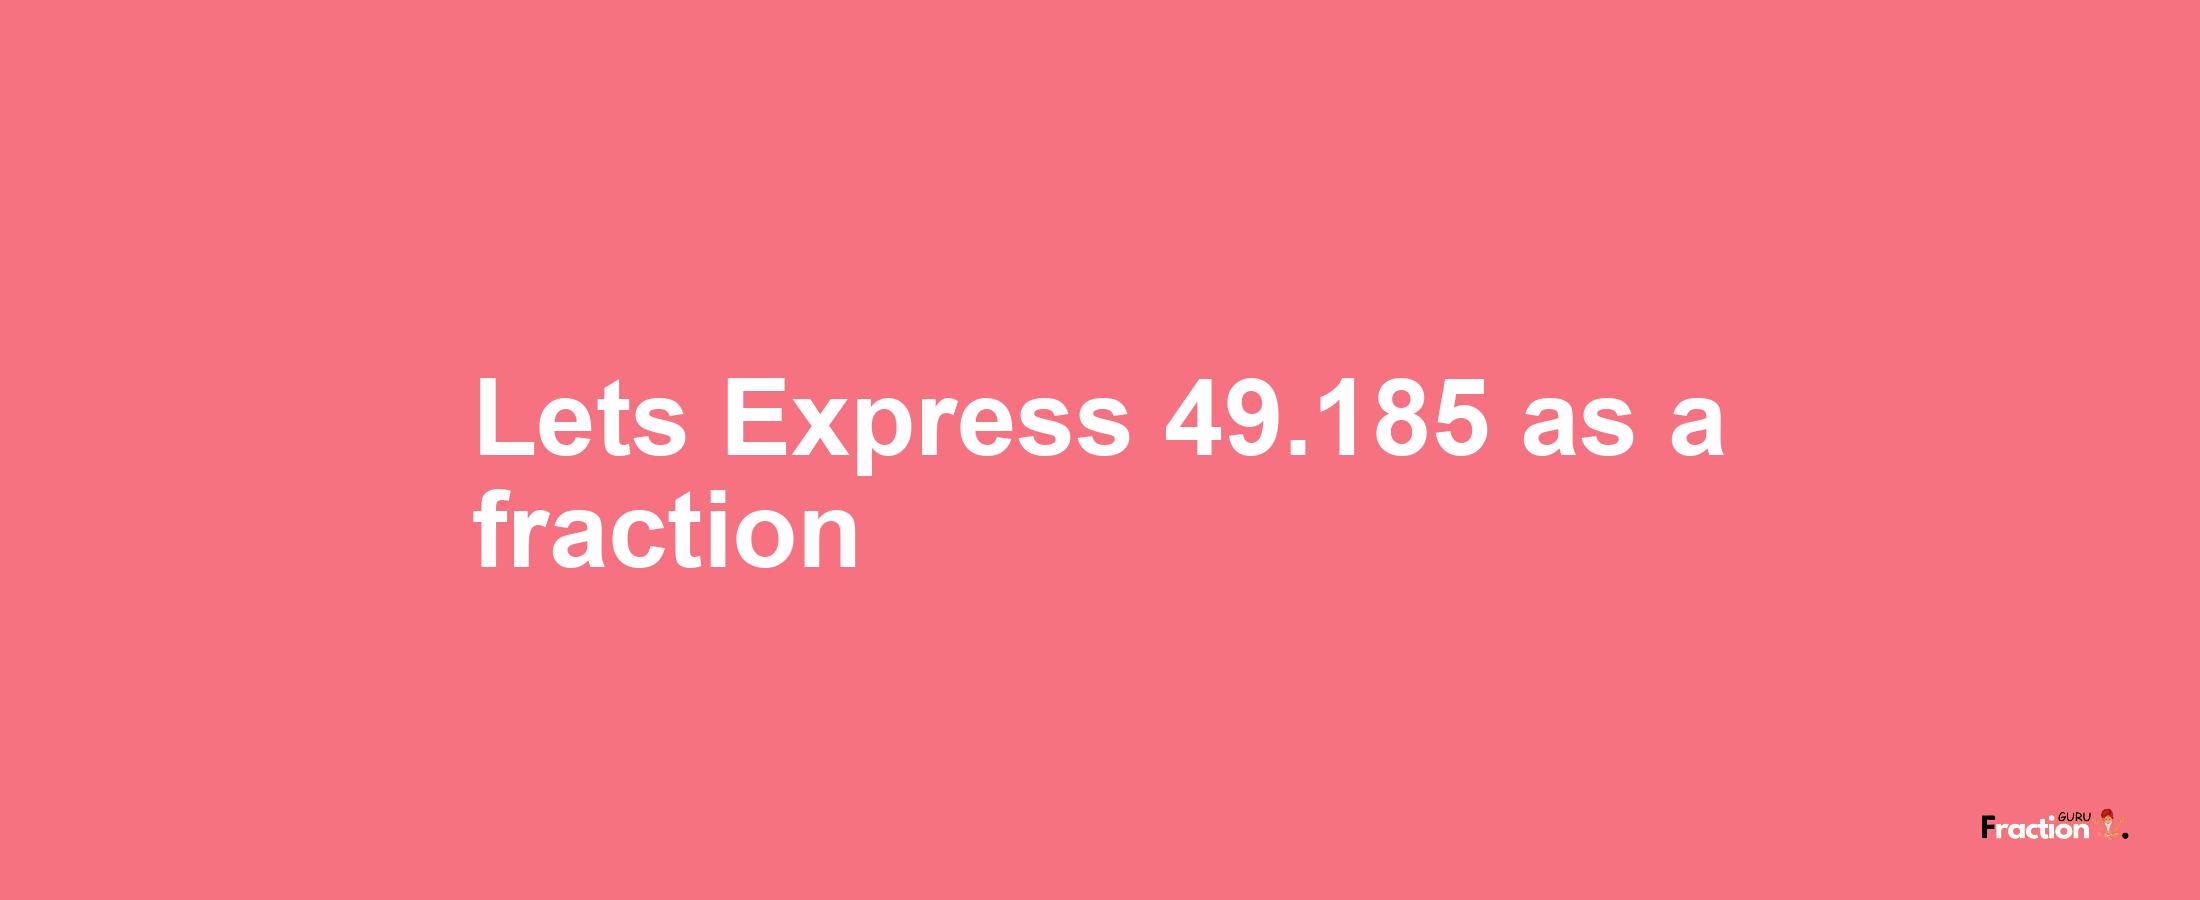 Lets Express 49.185 as afraction